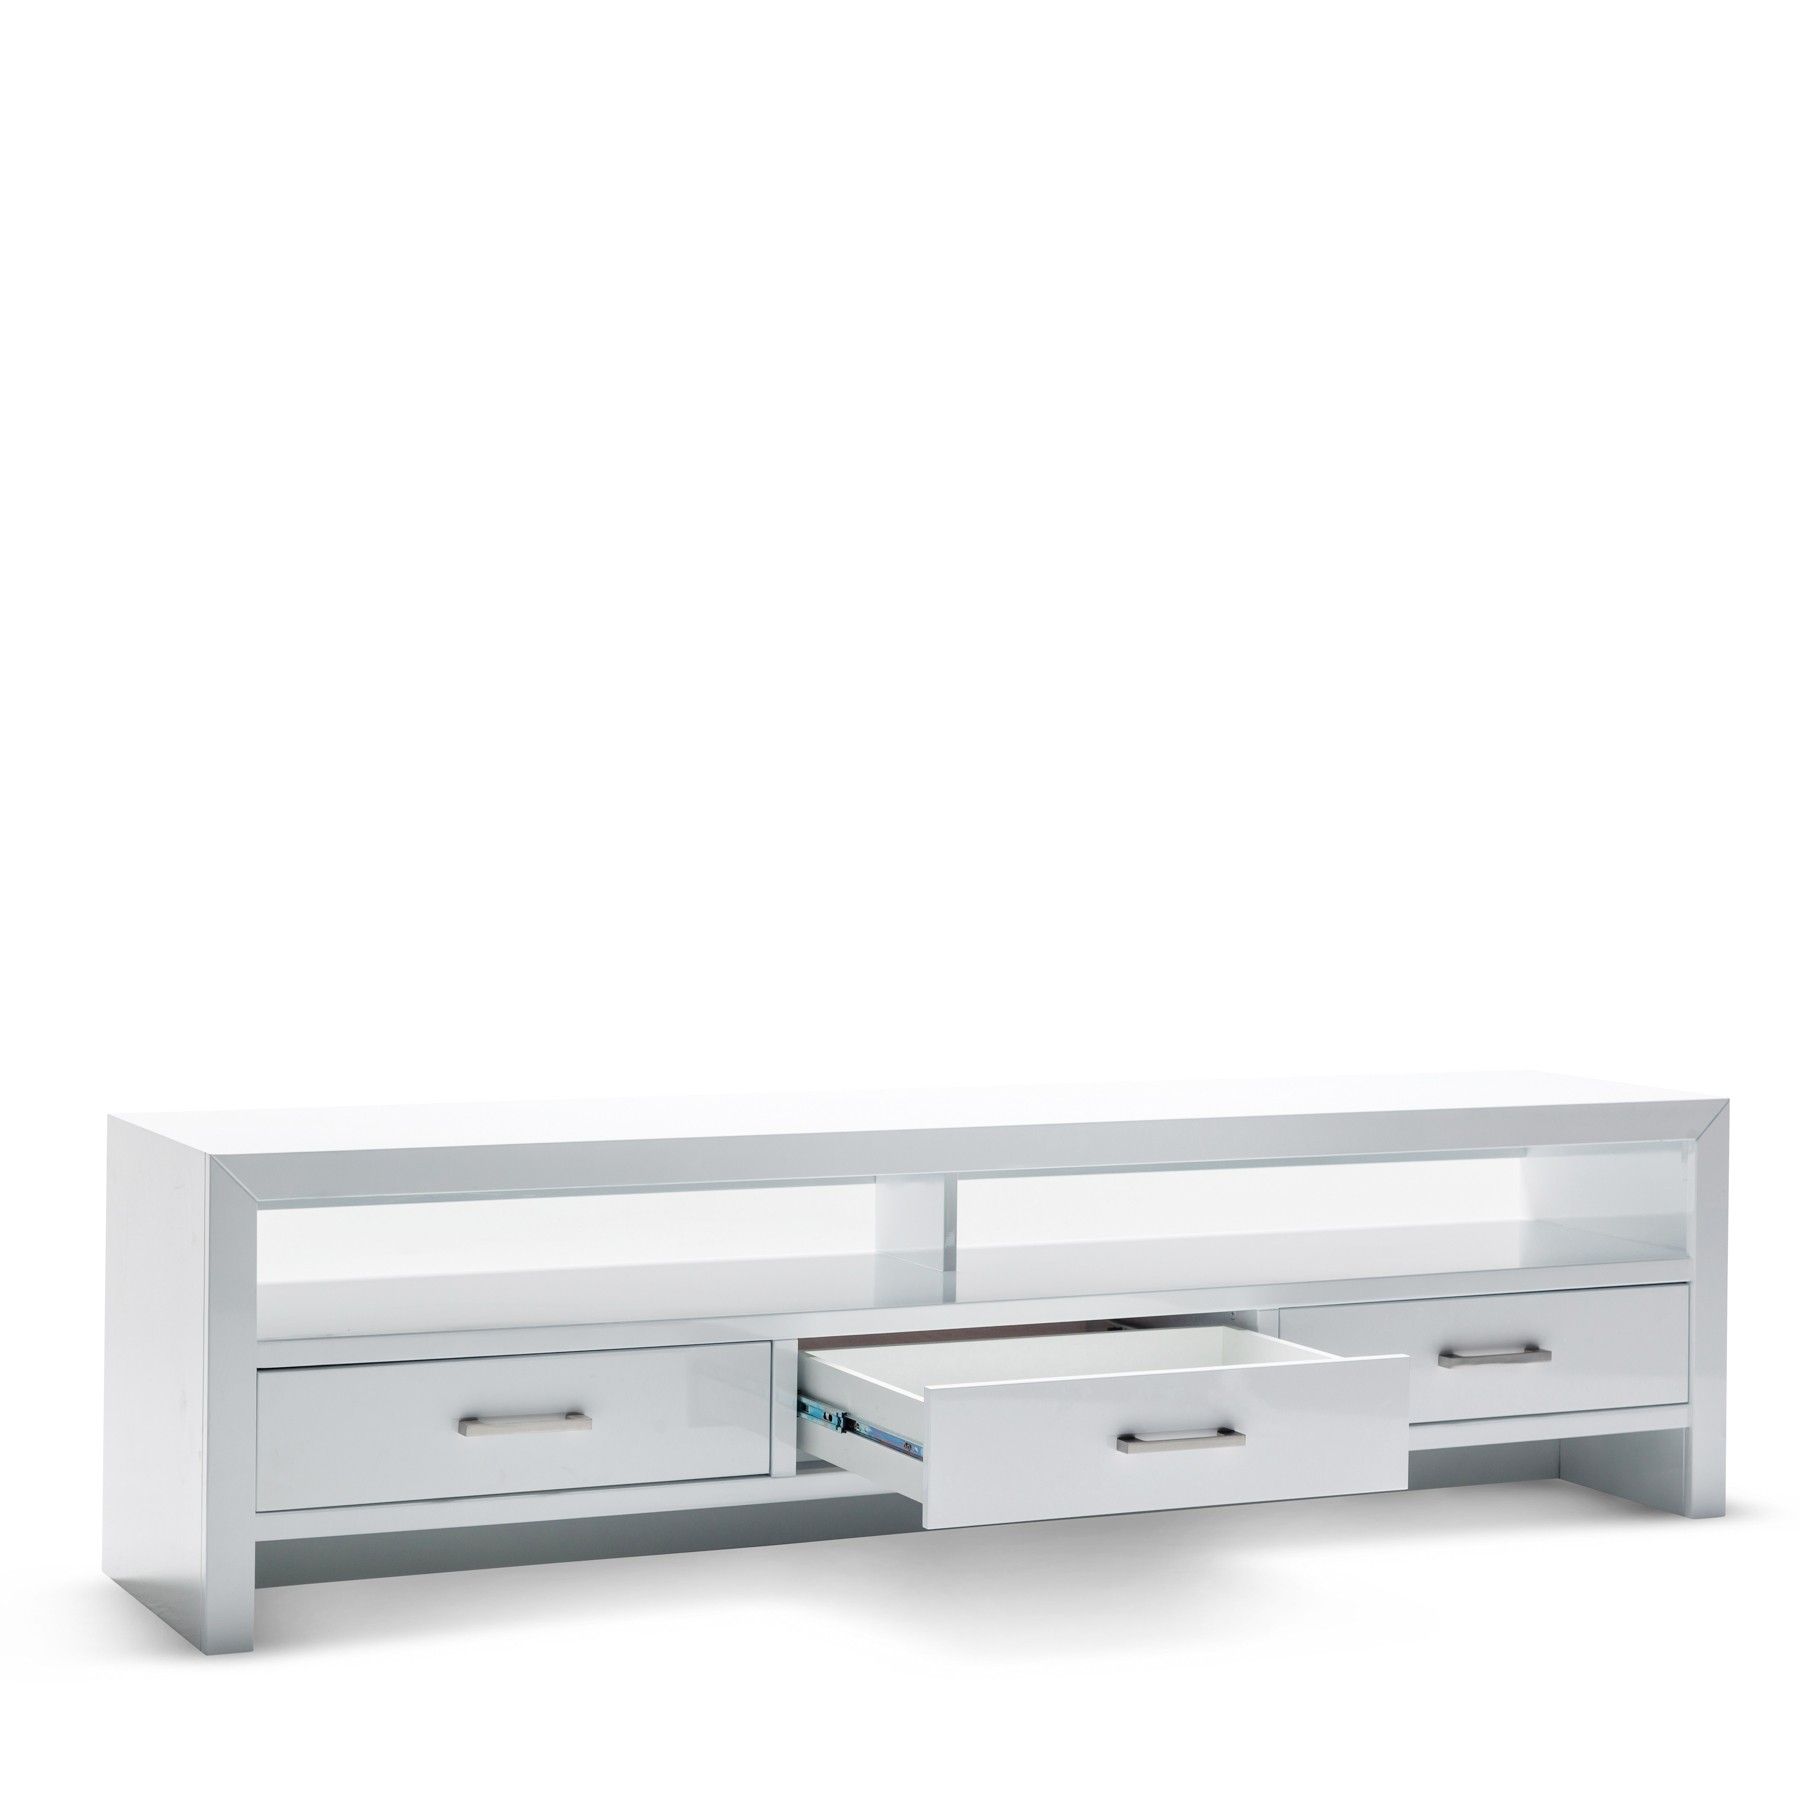 Vanessa Brand New High Gloss White Modern 2m Tv Unit Pertaining To Gloss White Tv Unit With Drawers (View 15 of 15)